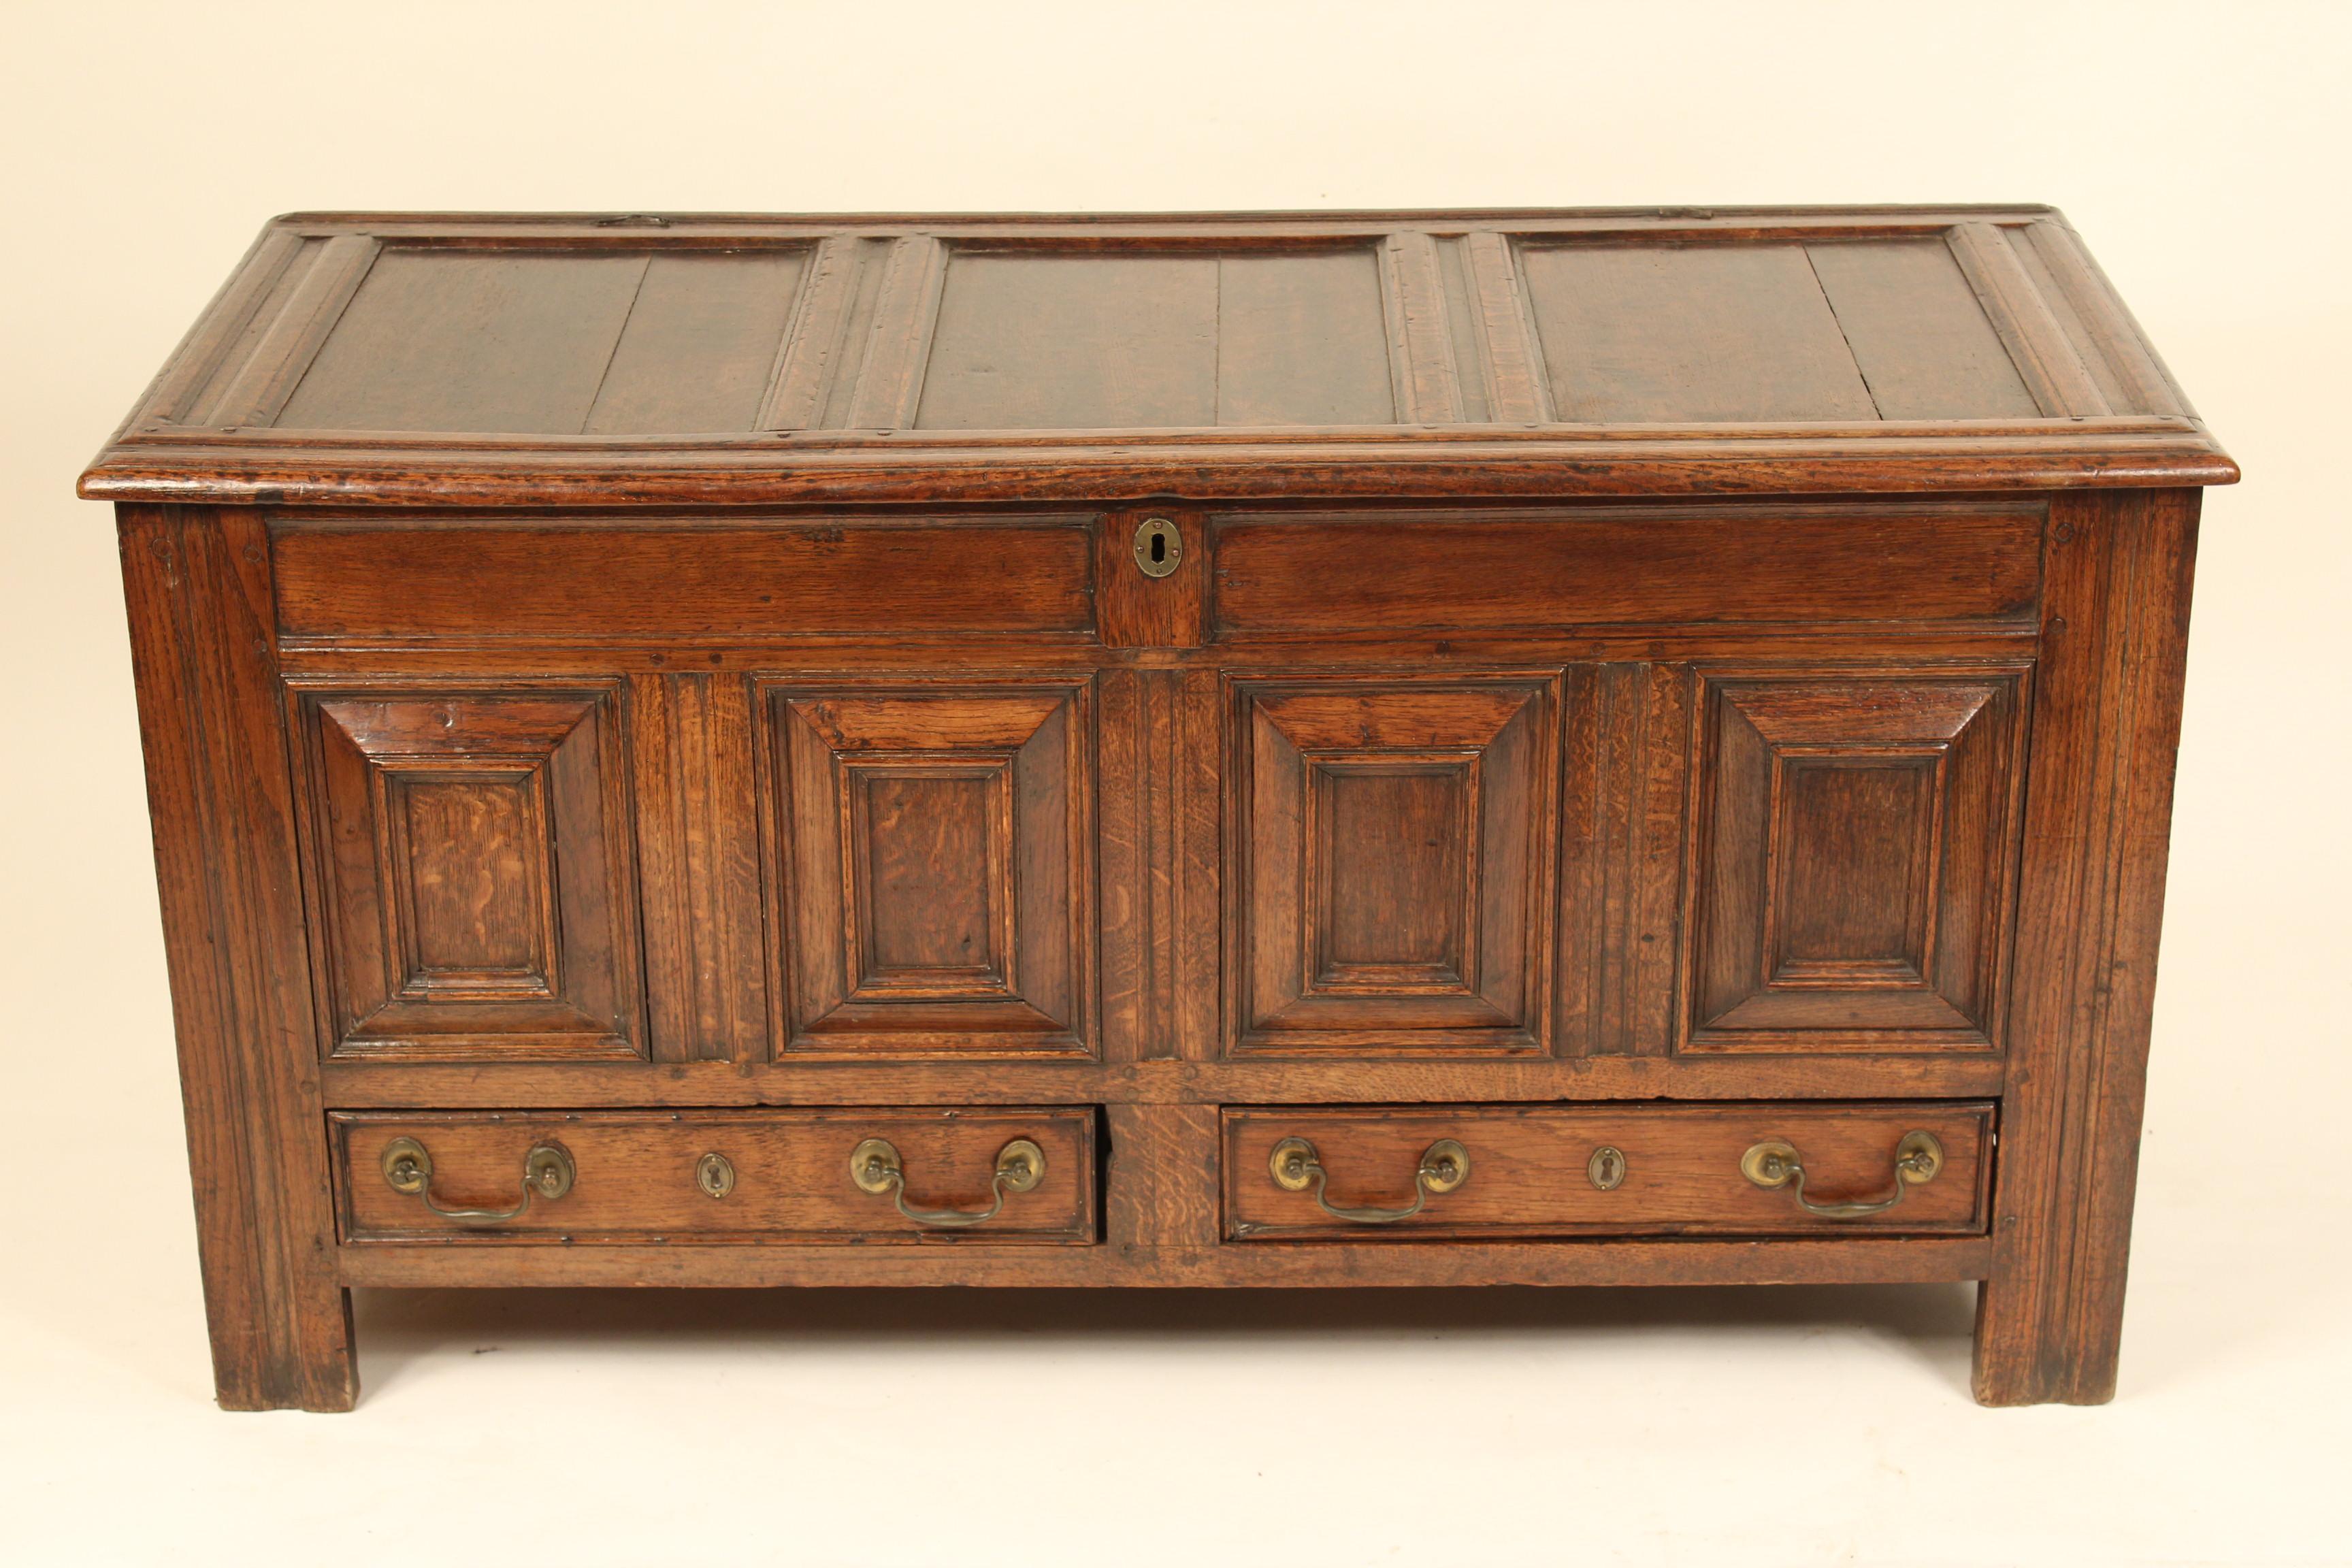 English oak trunk, 18th century. With raised front panels. Mortise and tenon construction. Excellent old patina.